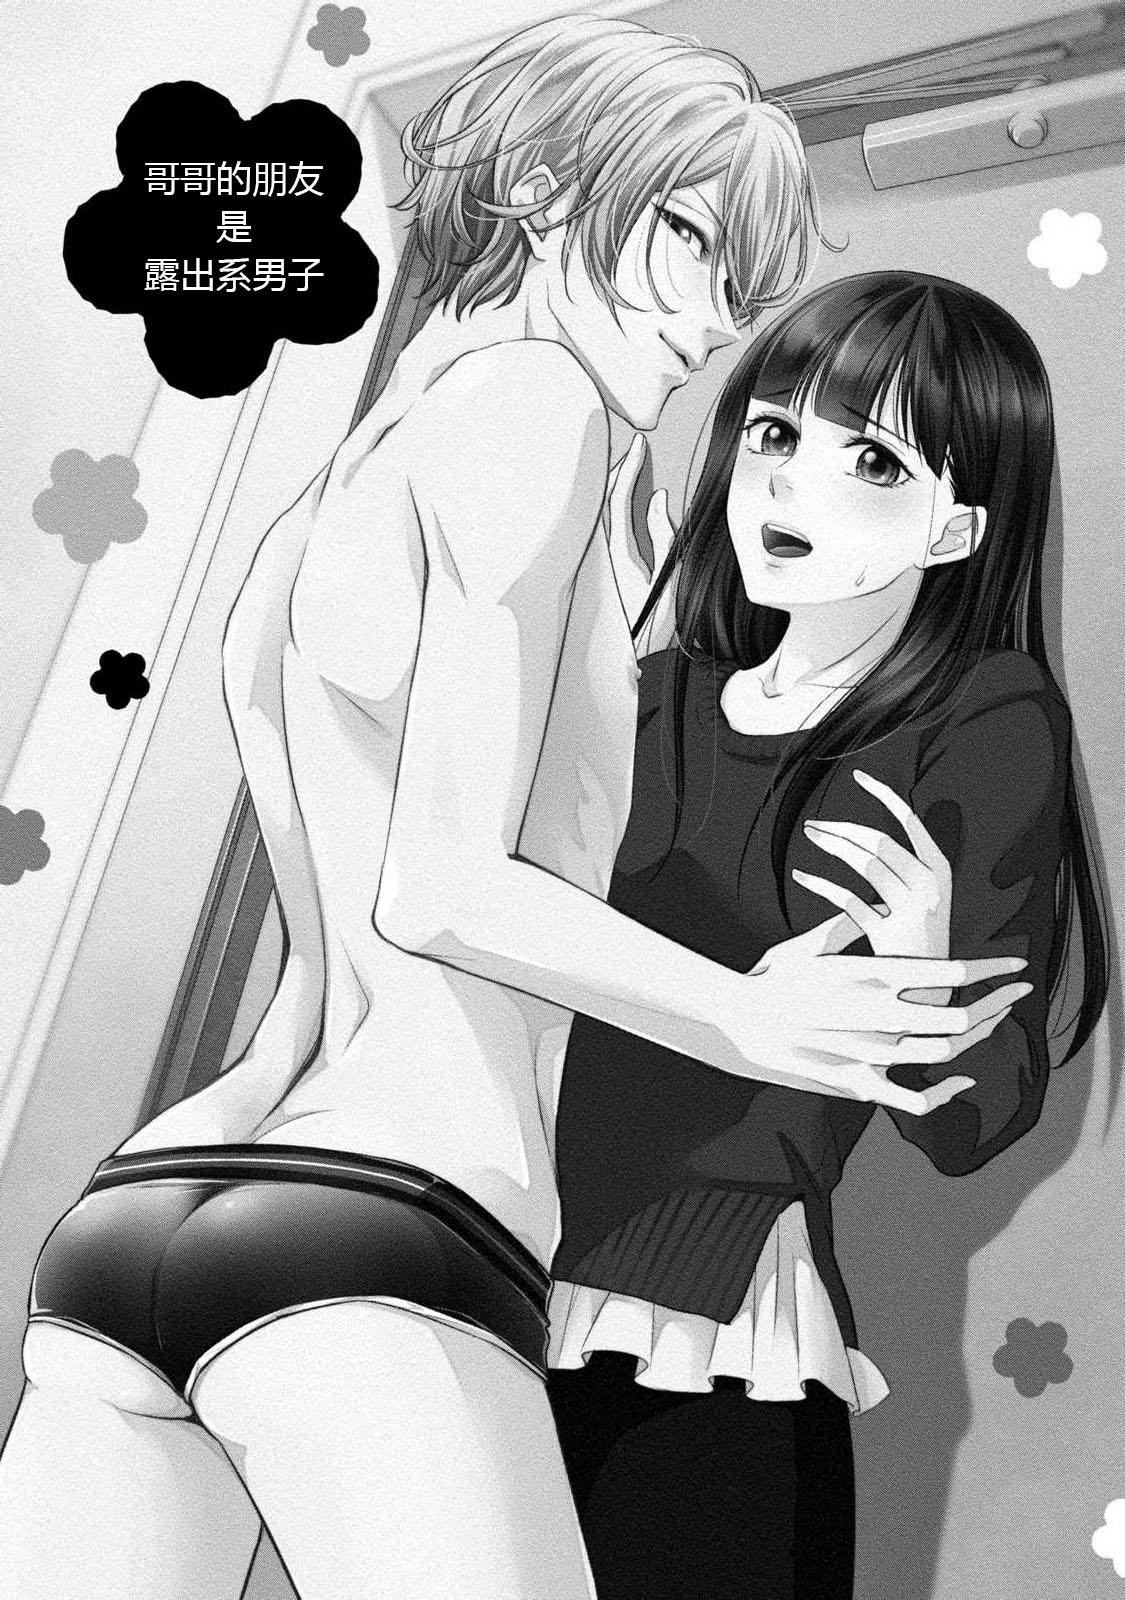 Prostituta If my brother's friend was a male of exposure | 哥哥的朋友是露出系男子 Porno Amateur - Page 2